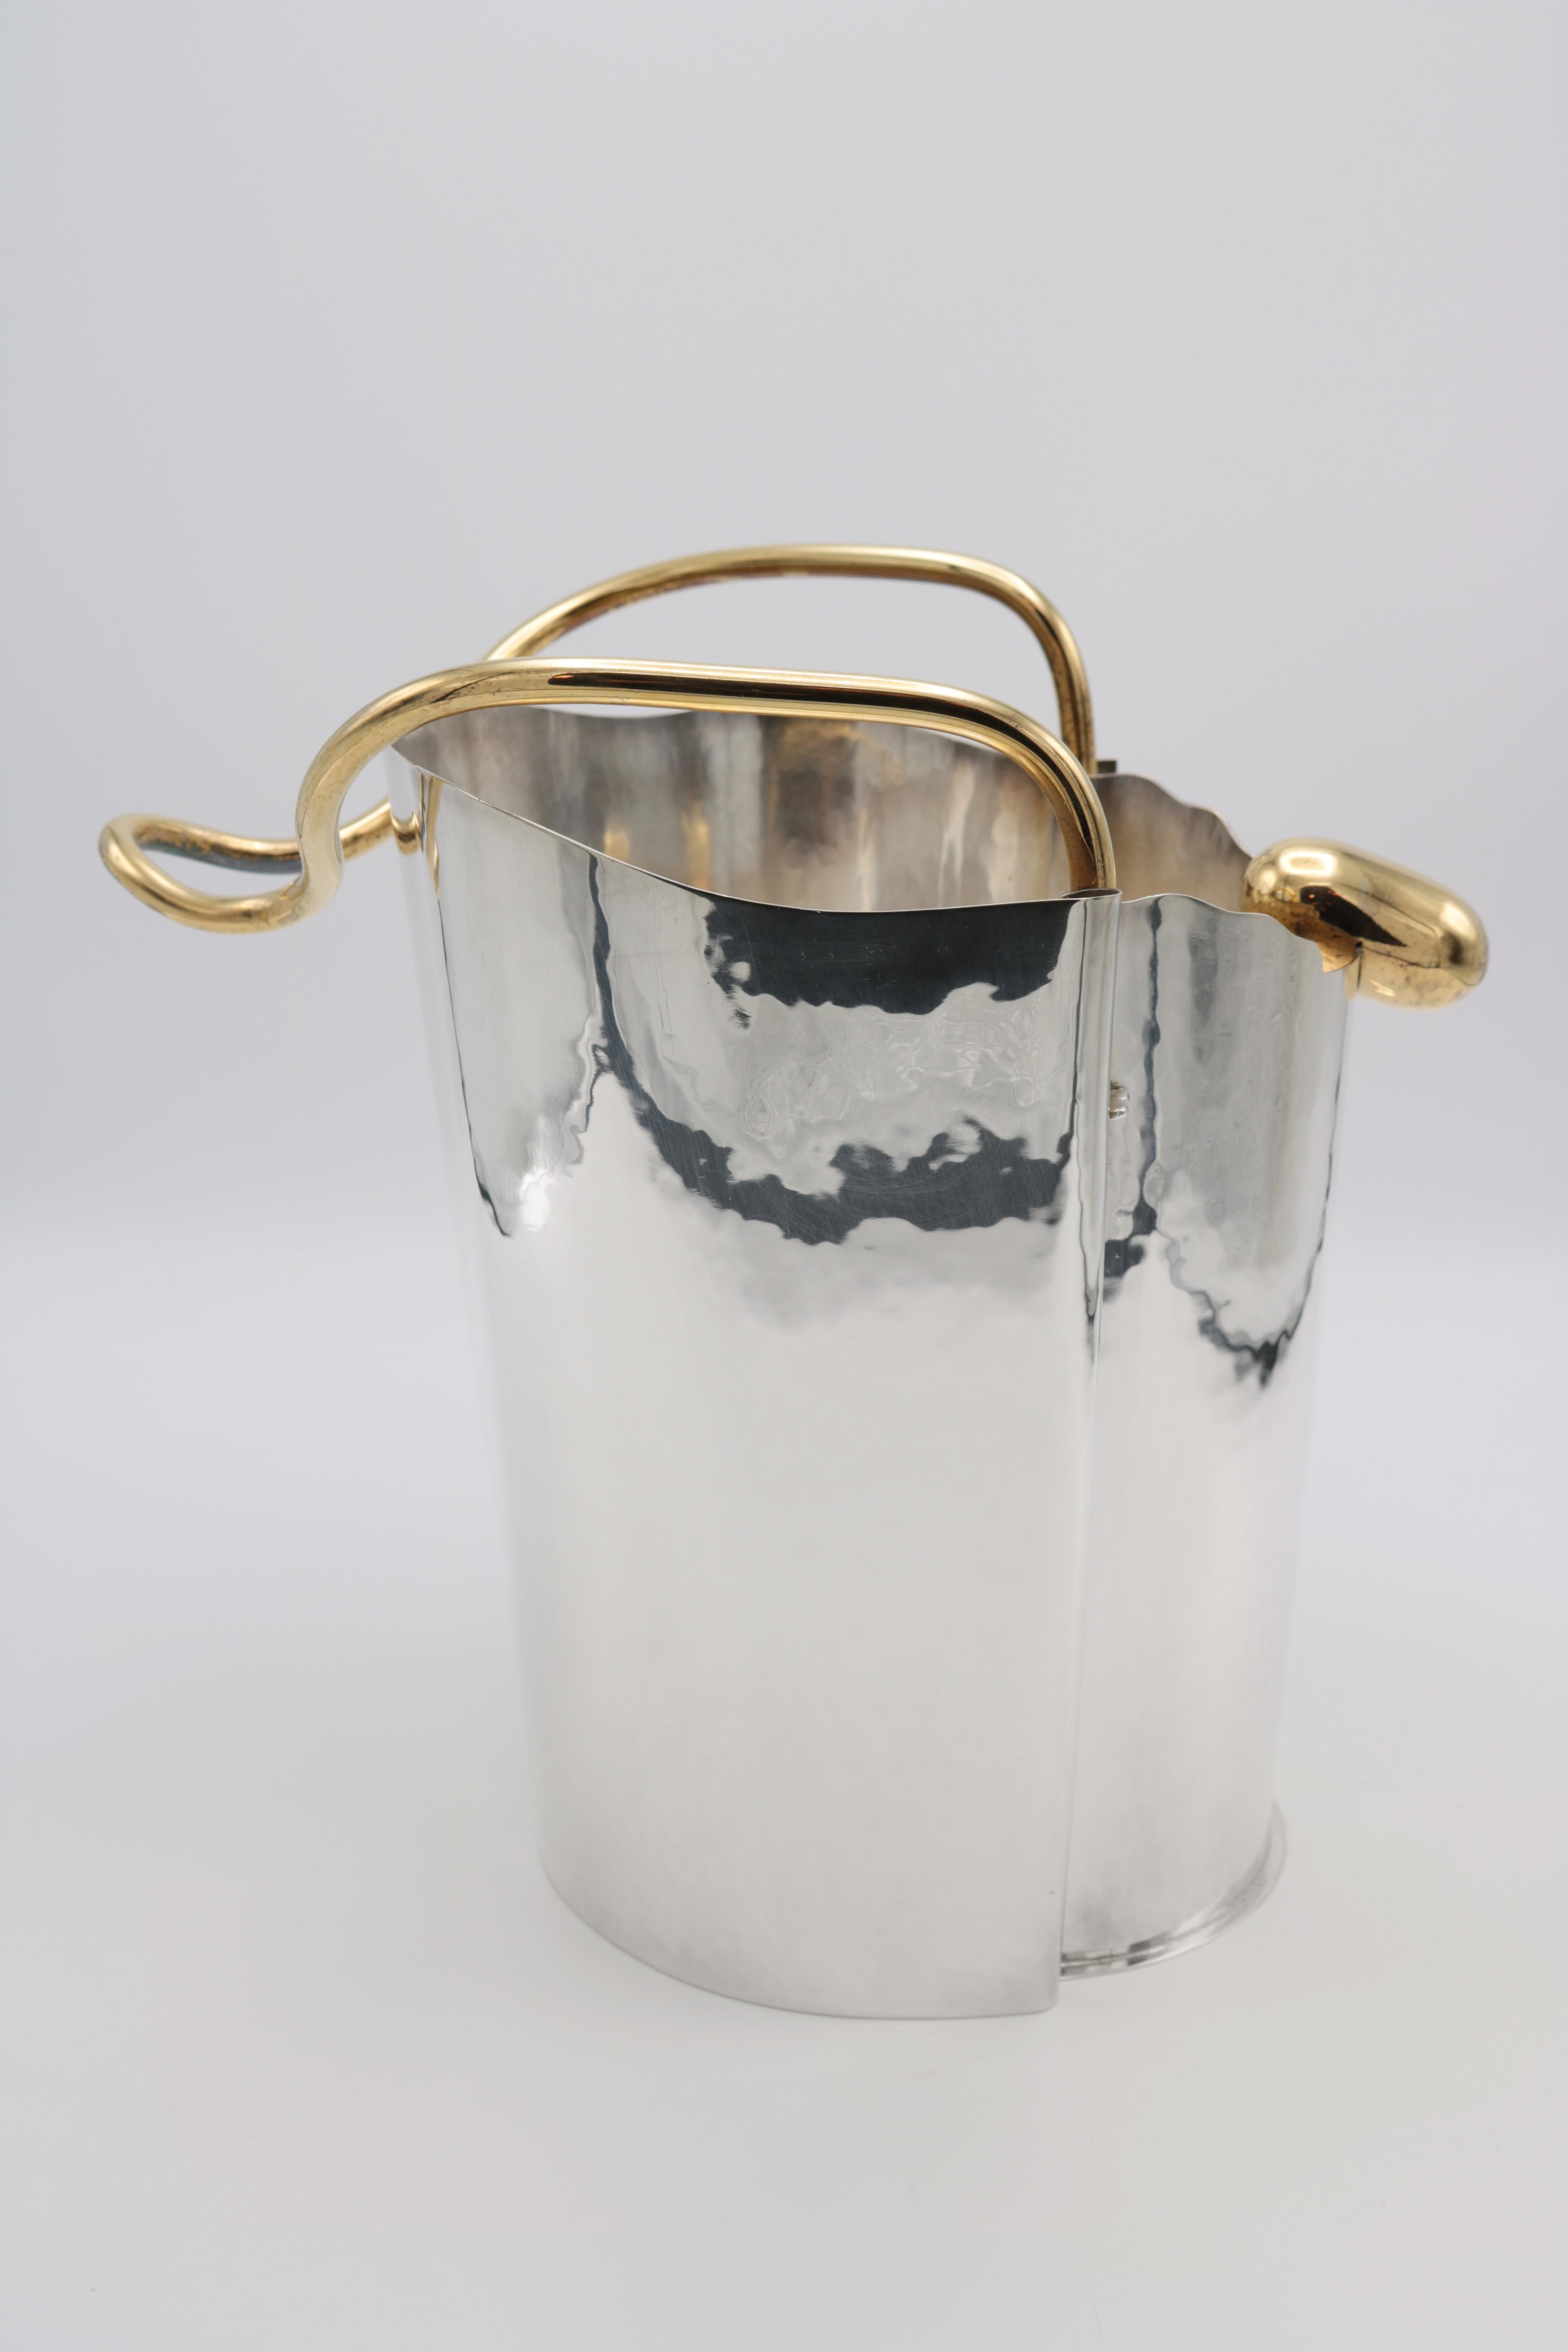 A sterling silver champagne cooler designed by Borek Sipek for Cleto Munari. 
Hand hammered sterling silver with gold-plated handles.
Signed on the bottom: Borek Sipek per Cleto Munari and numbered 16/99.